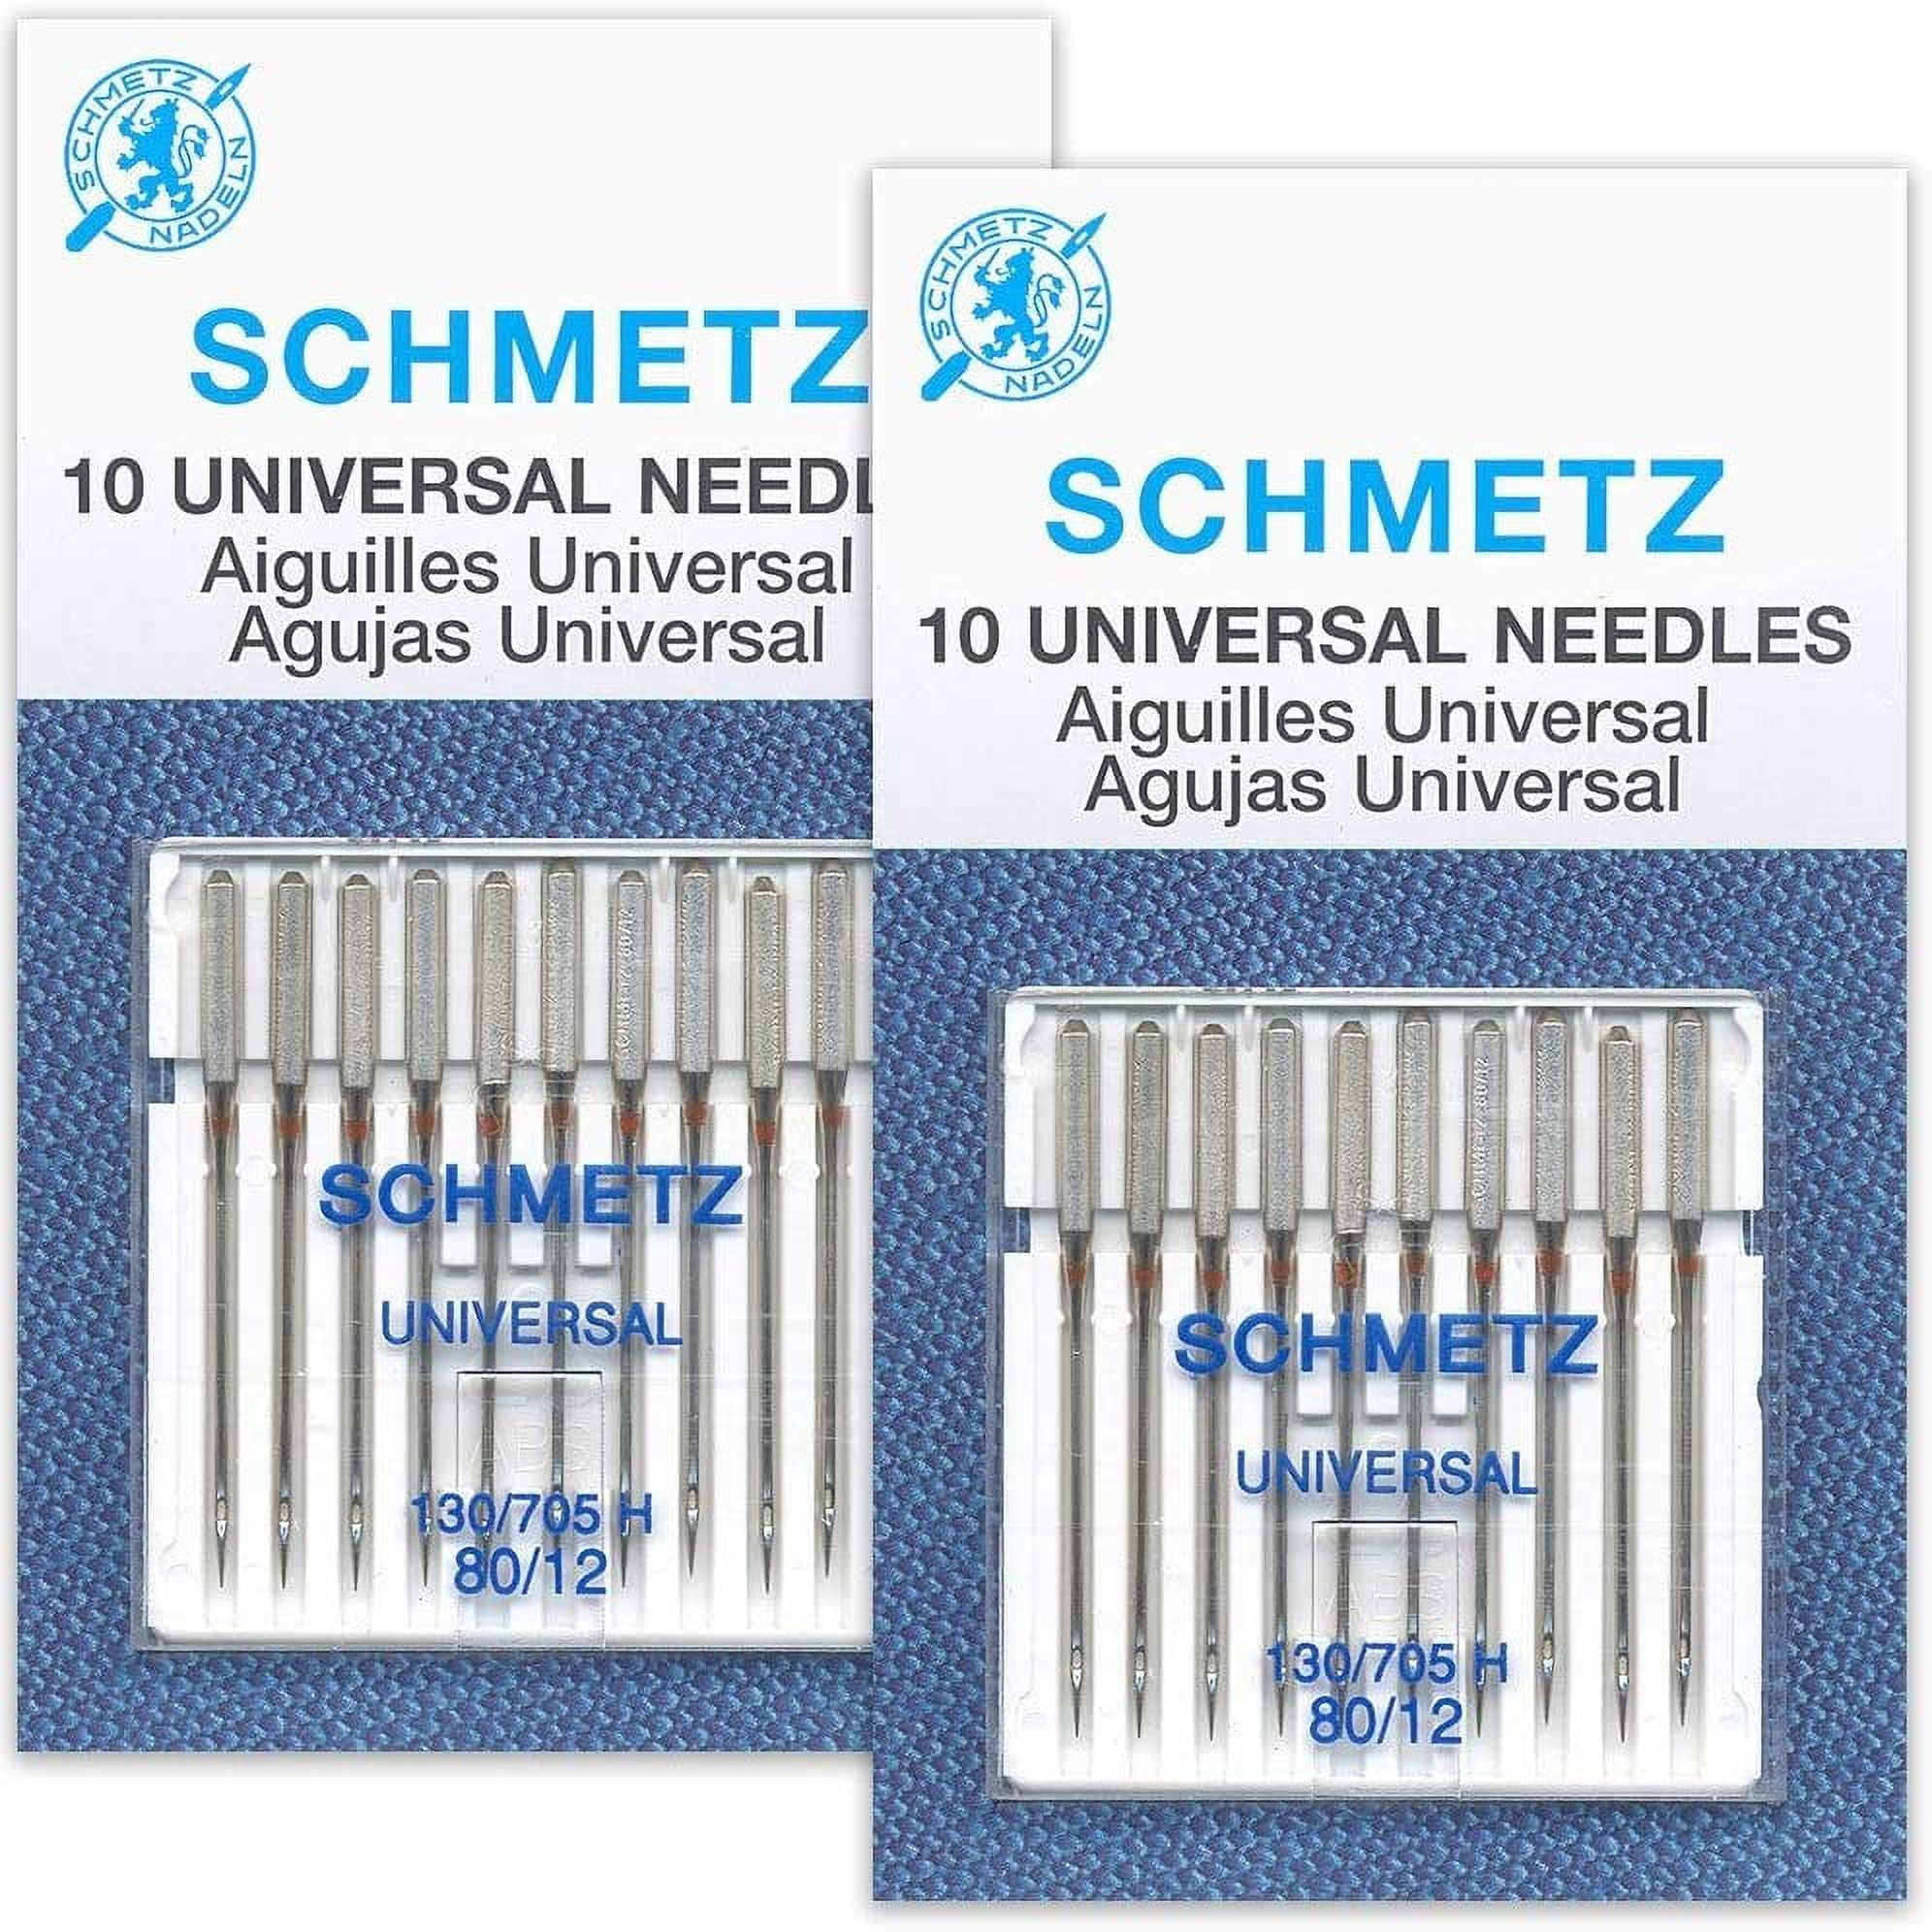 Schmetz Leather Home Sewing Machine Needles Size 14, 16 or 18 Will Fit Most  Home Sewing Machines Kenmore, Singer, Elna, White, 